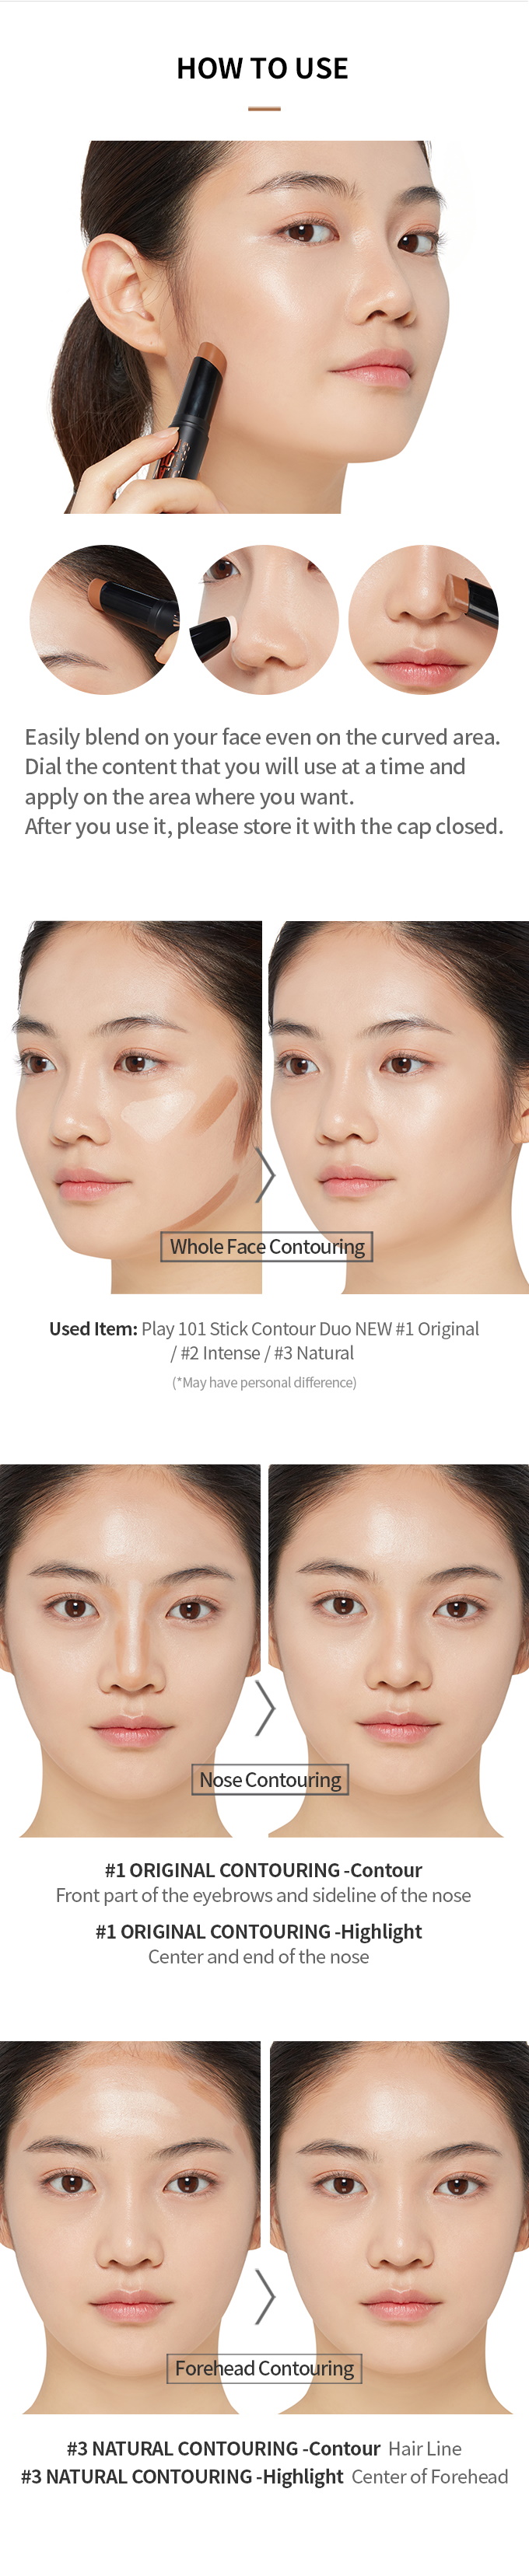 [ETUDE HOUSE] Play 101 Stick Contour Duo New